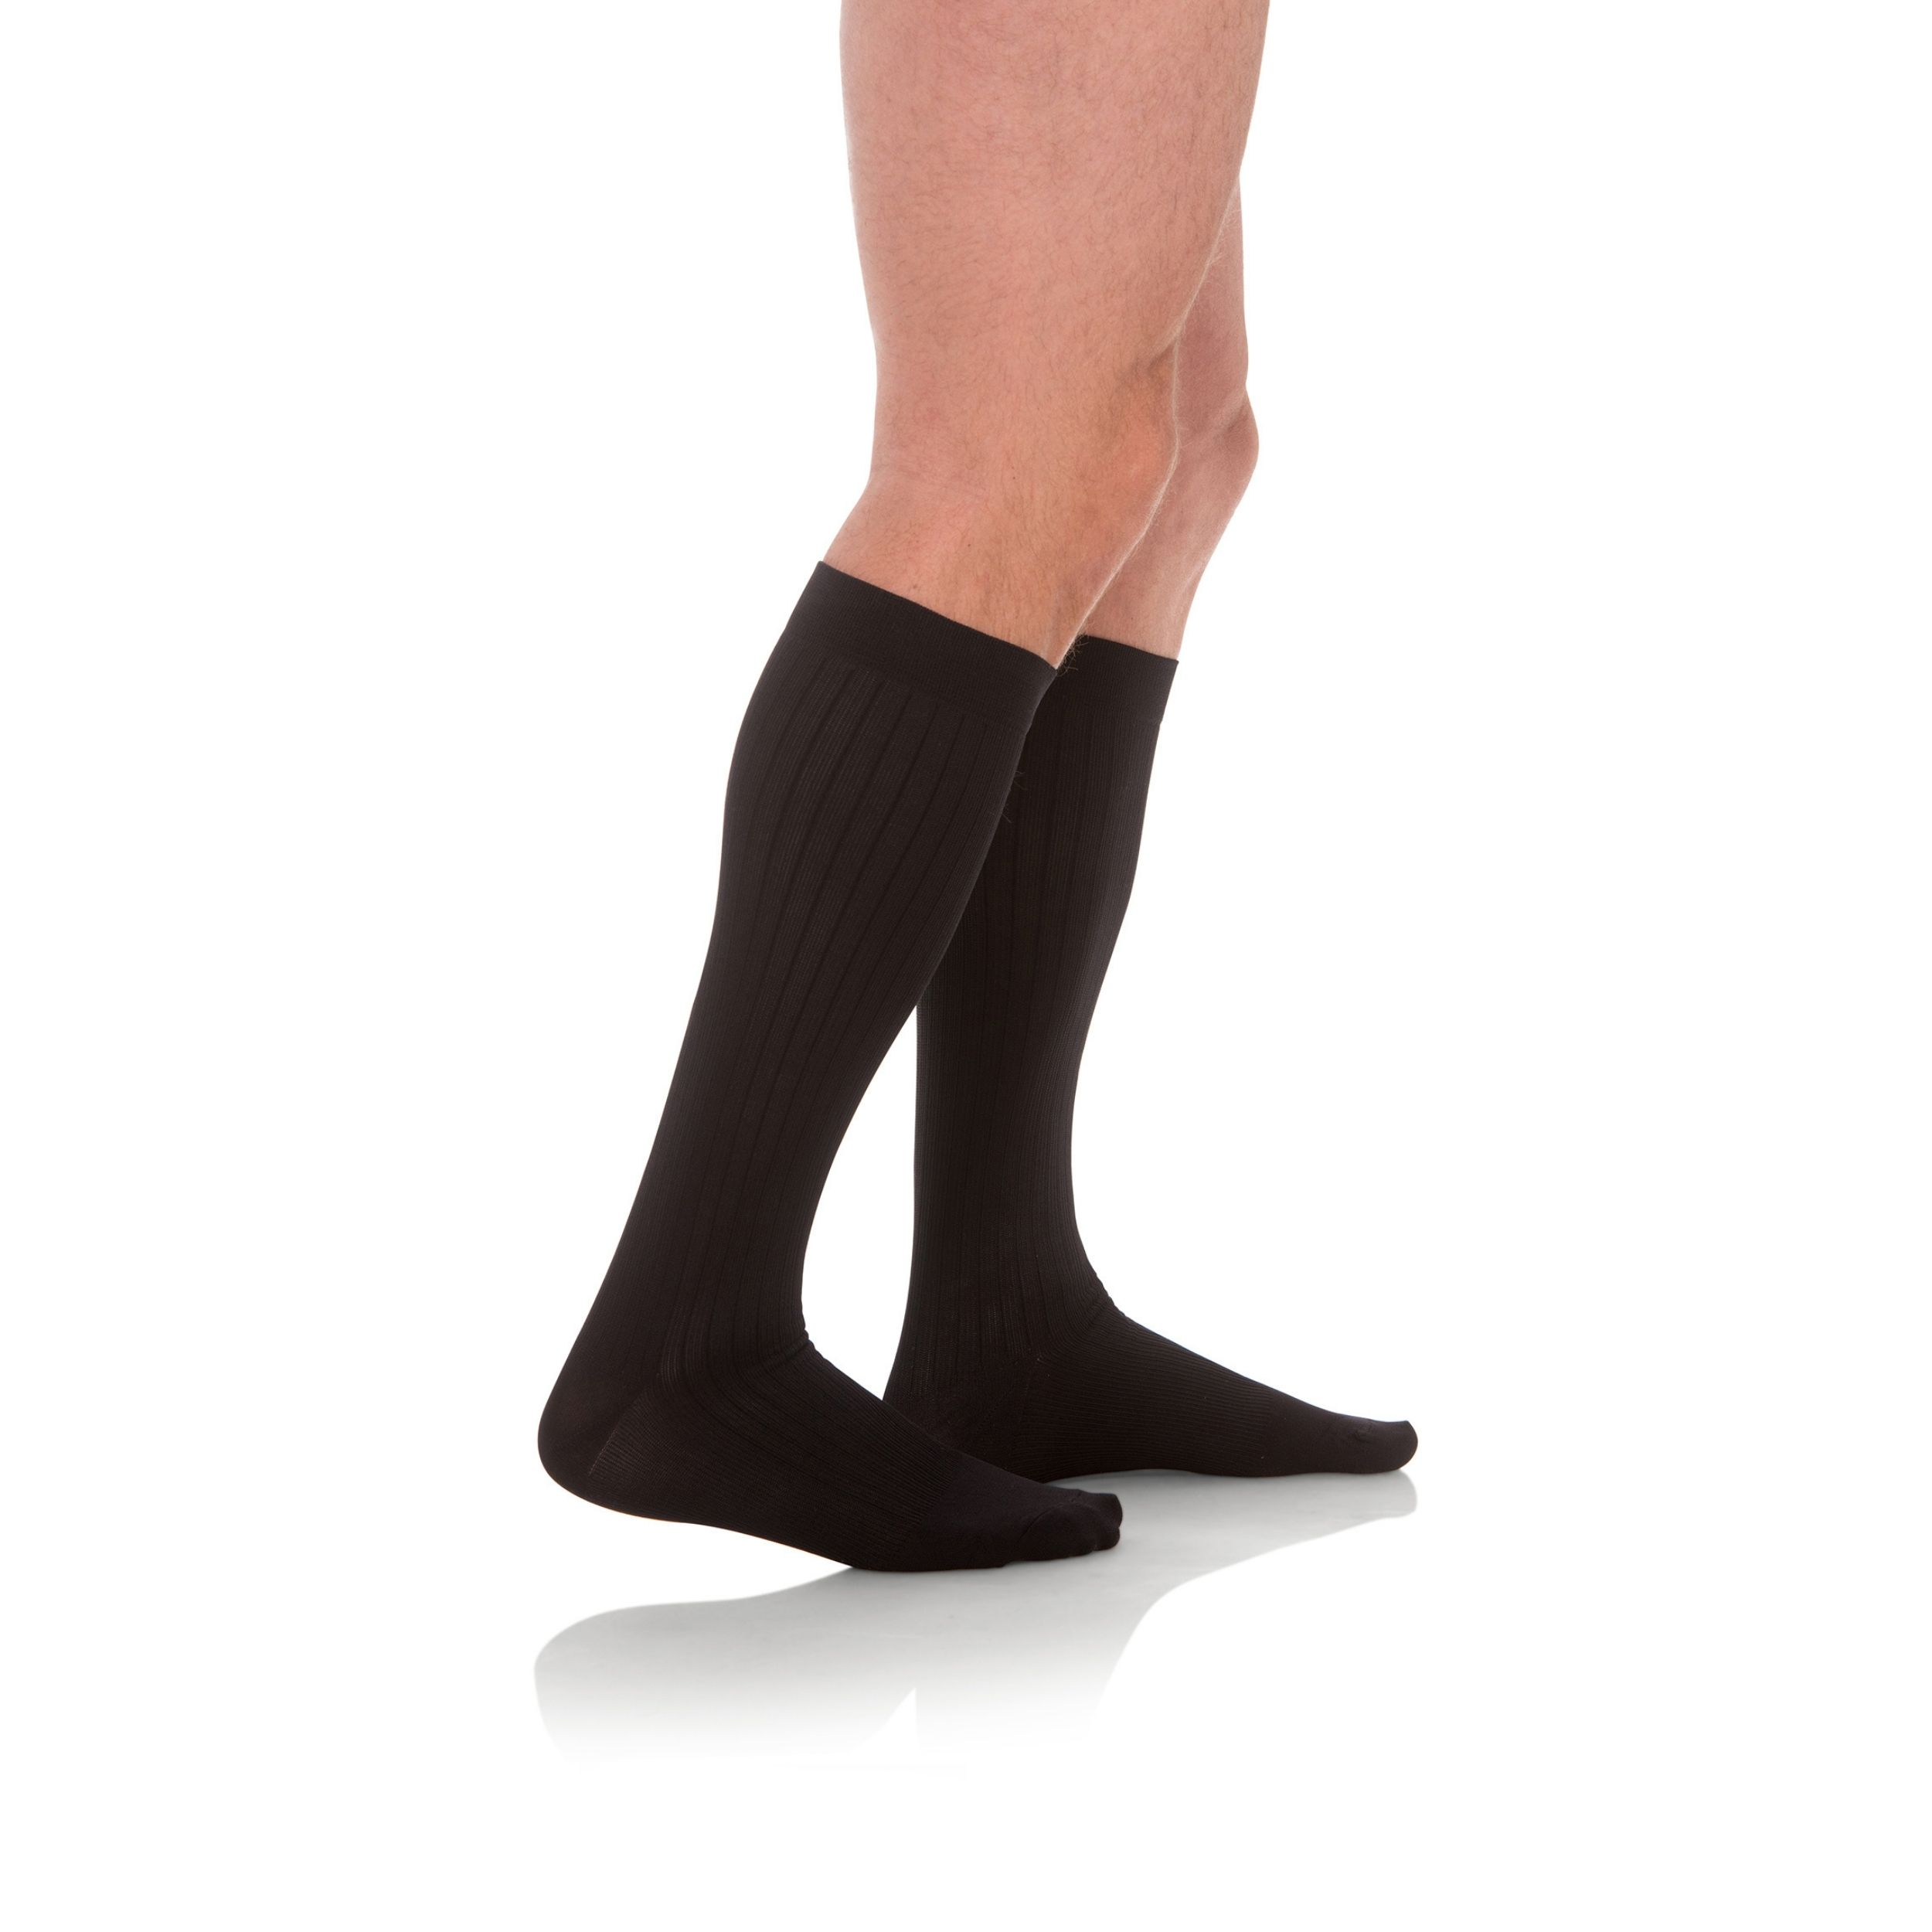 Compression Socks for Lymphedema | Compression Stockings